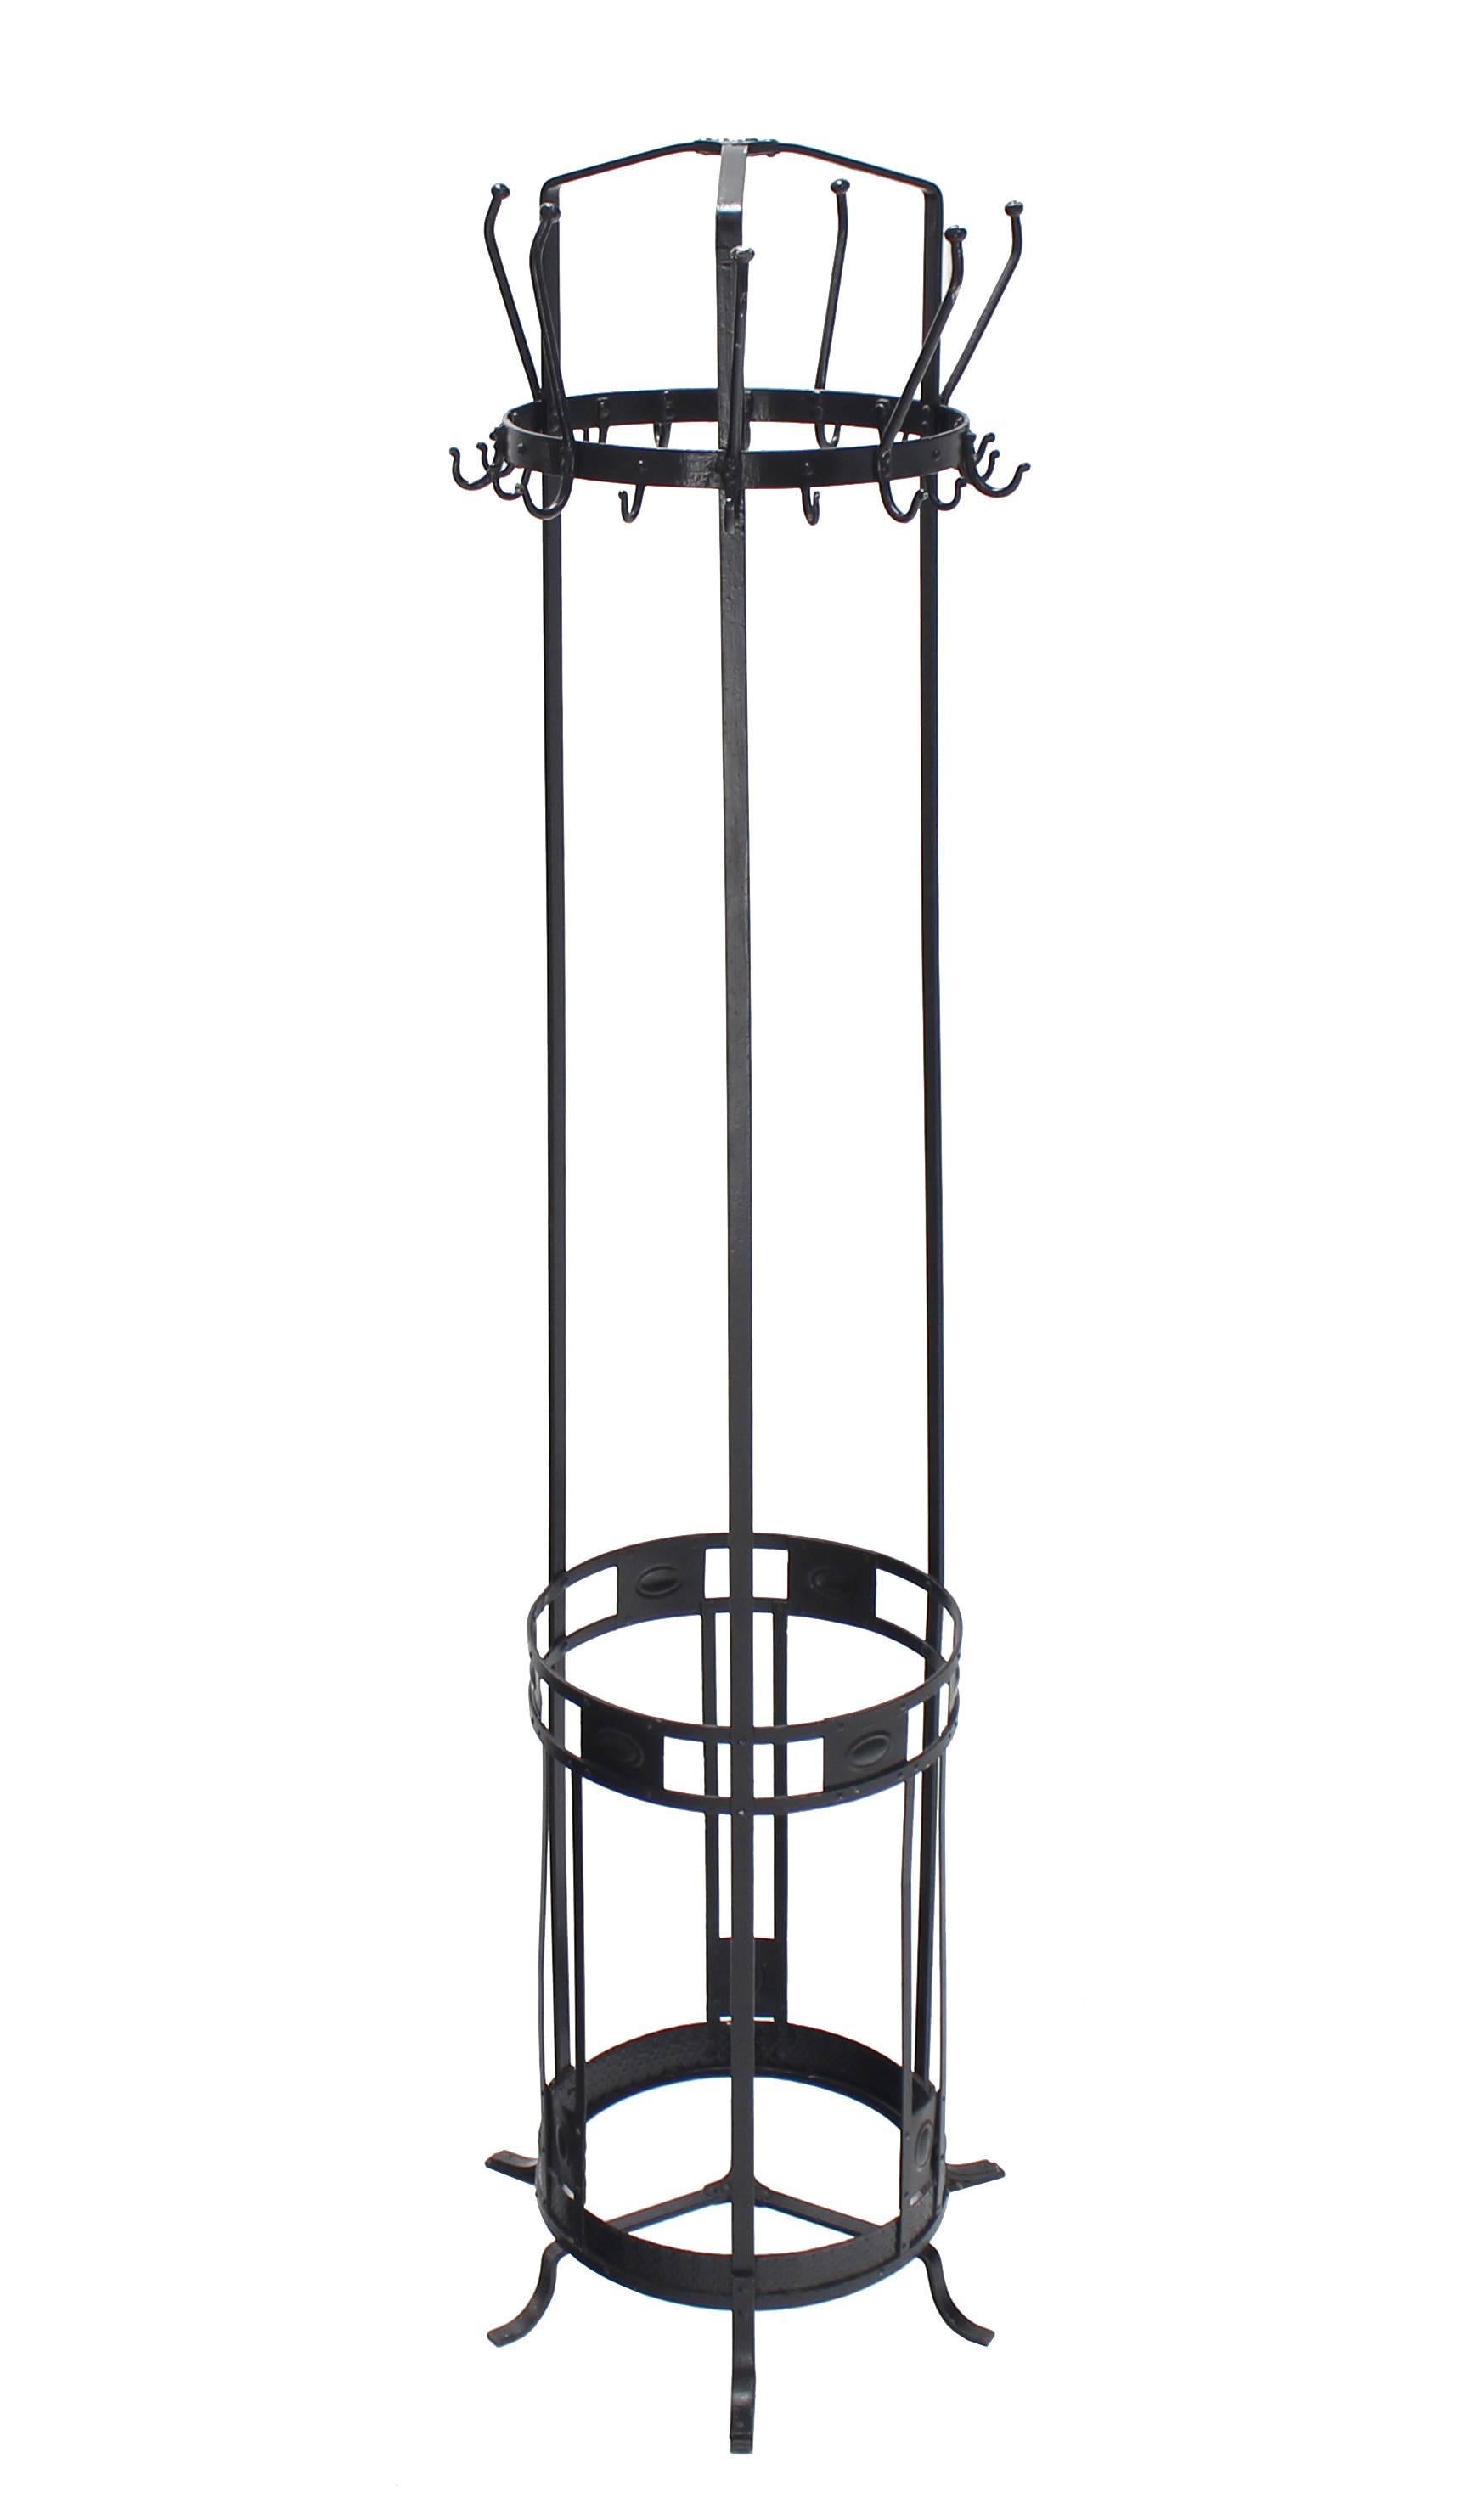 American Wrought Iron Coat Rack Umbrella Stand For Sale